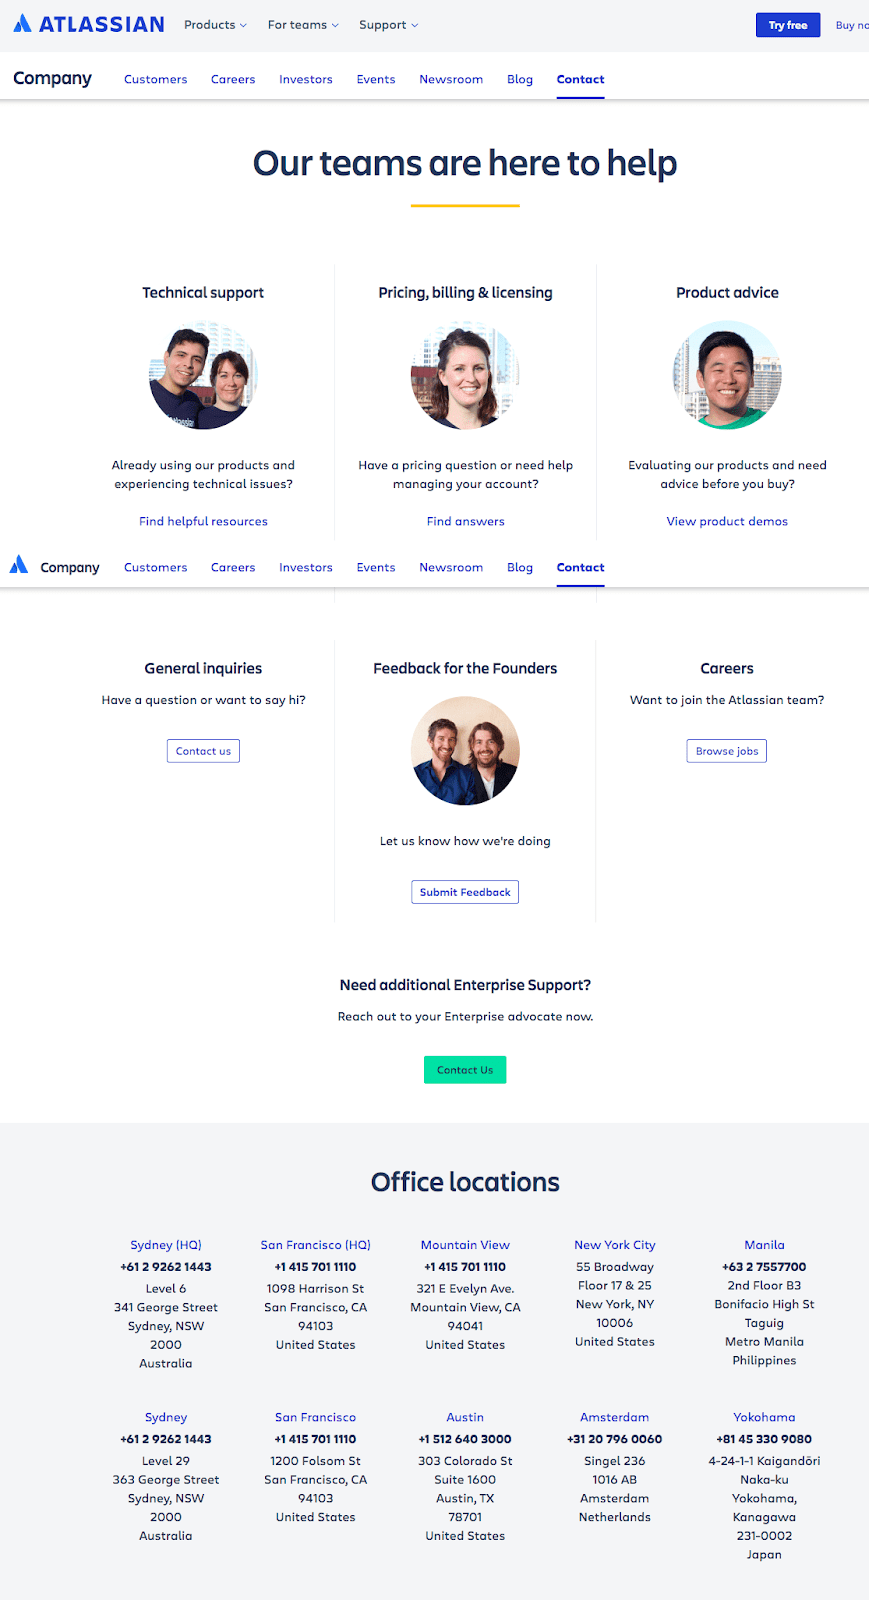 Best Contact Us Pages: Atlassian